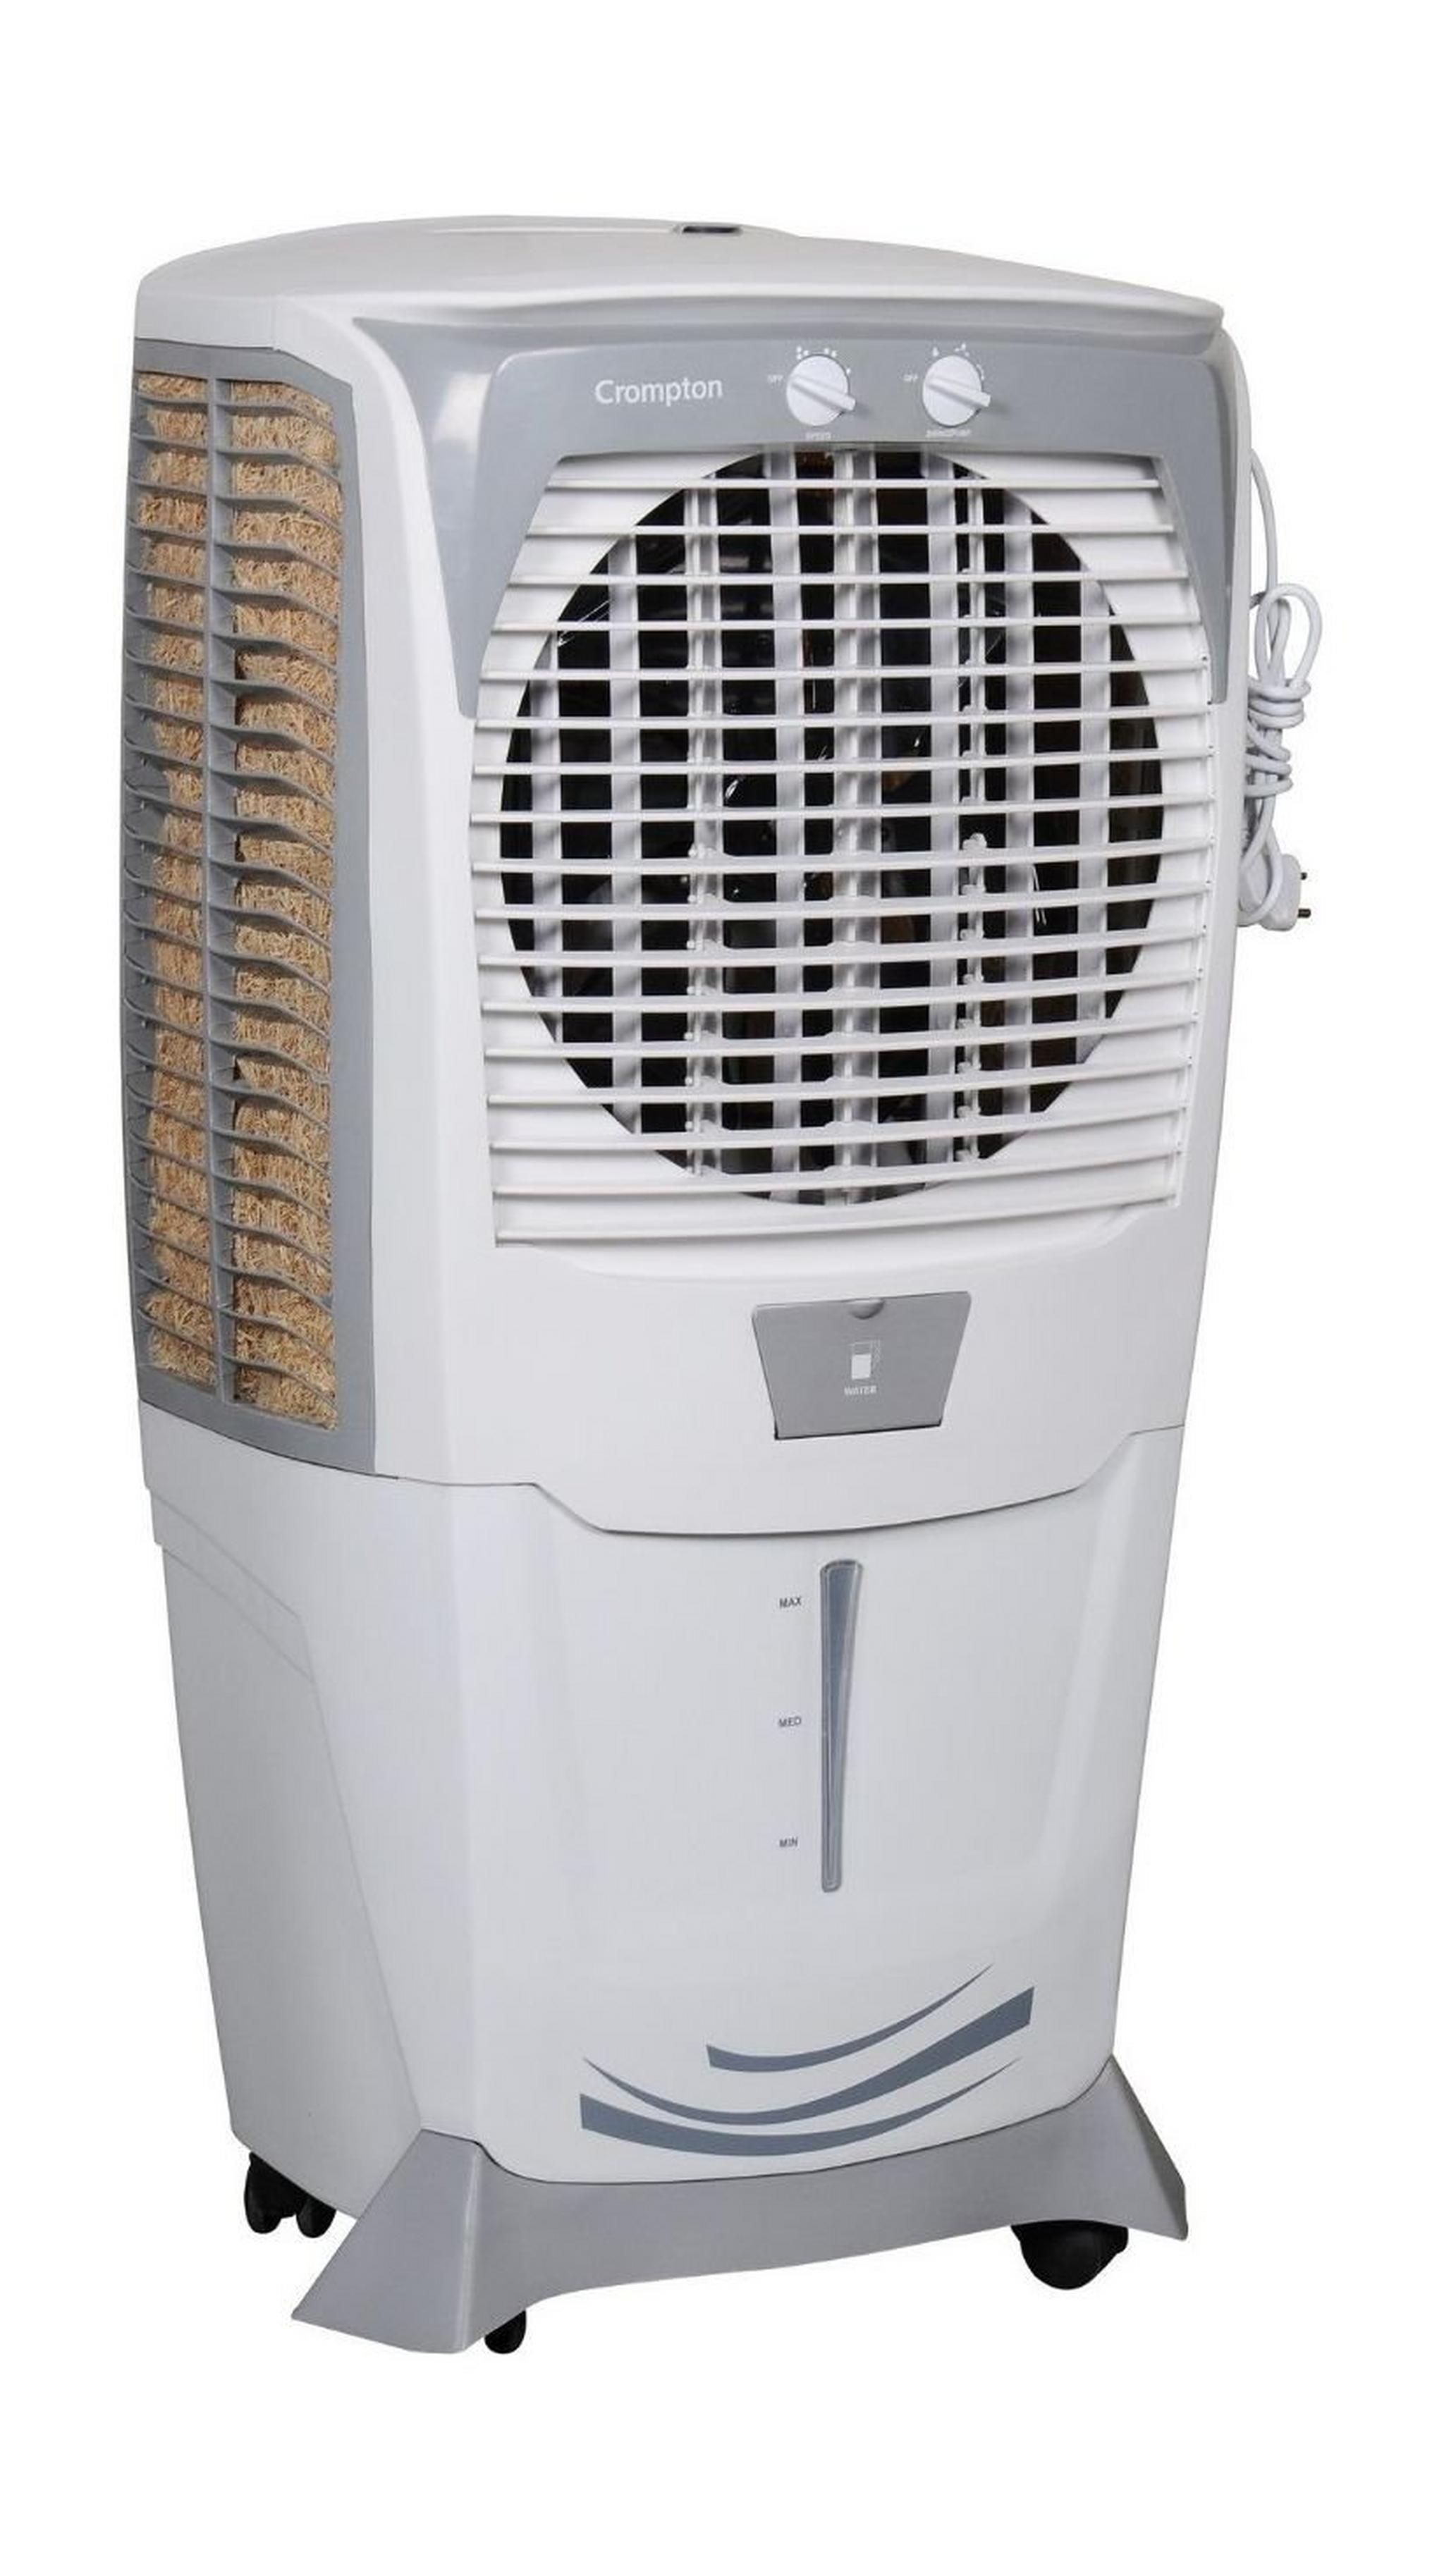 Crompton Greaves 75L Indoor & Outdoor Air Cooler (DAC751) – White